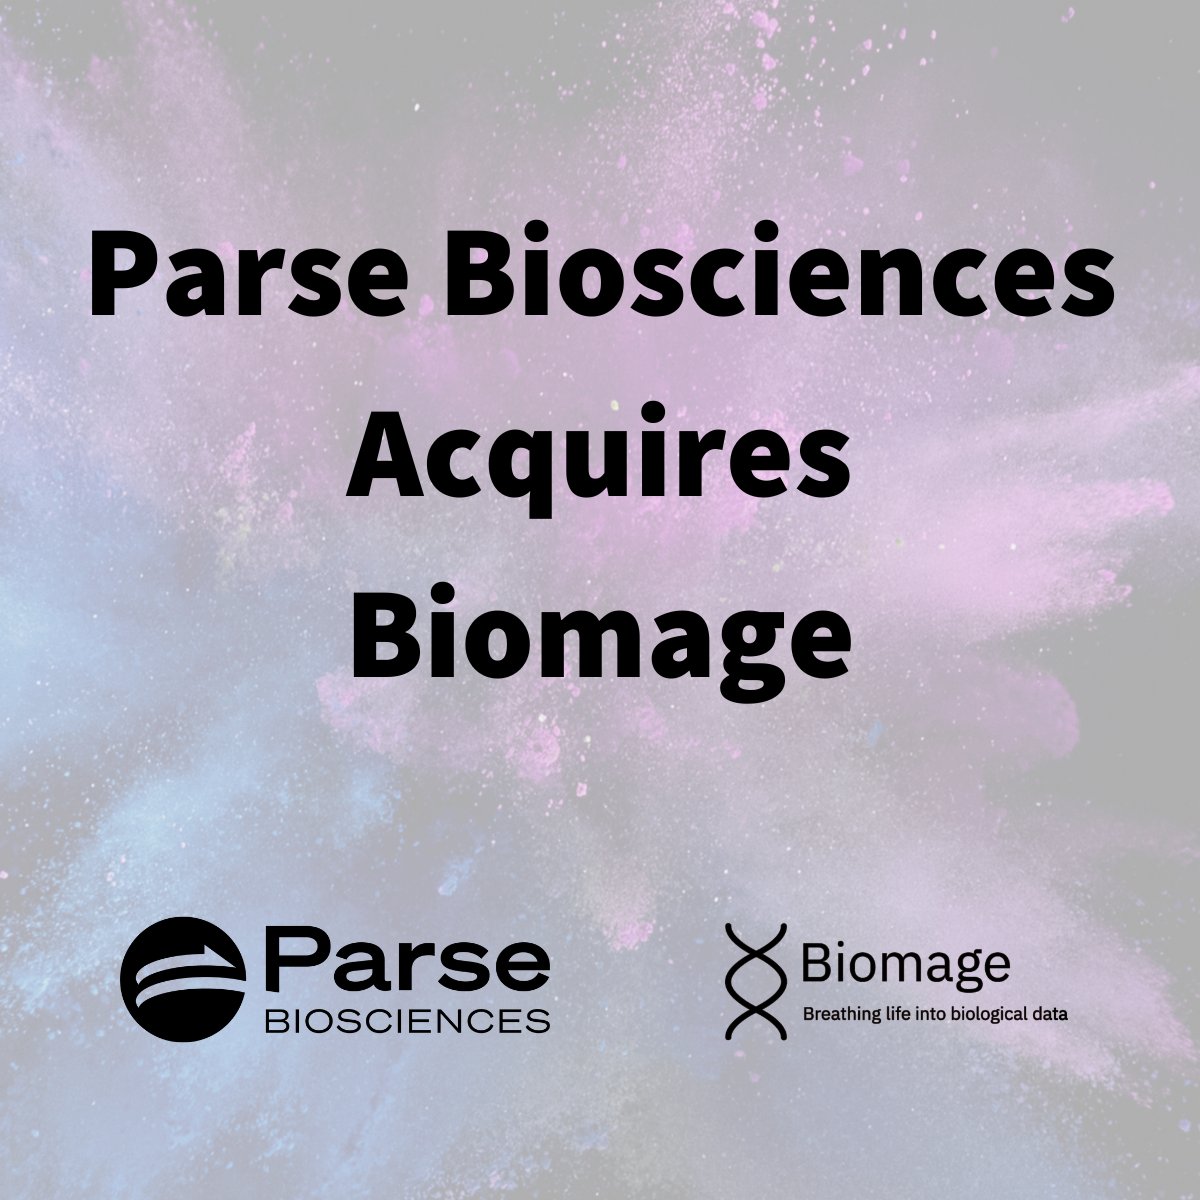 📣 Exciting News: We're thrilled to announce that Parse Biosciences has acquired @BiomageLtd! Learn more: parse.bio/4aWzjF0